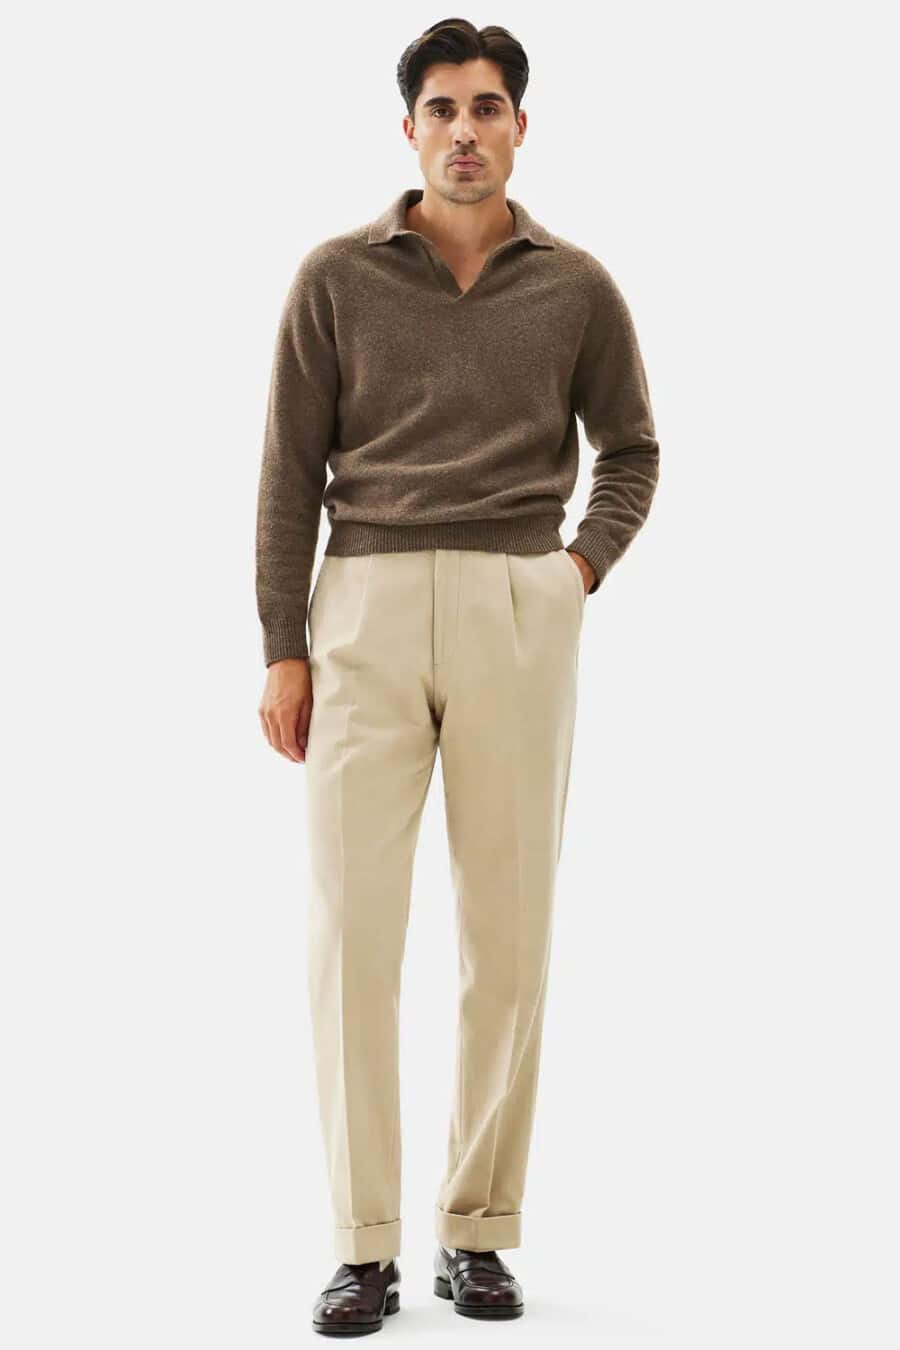 Men's pleated khaki pants, brown long sleeve polo shirt and brown leather penny loafers outfit